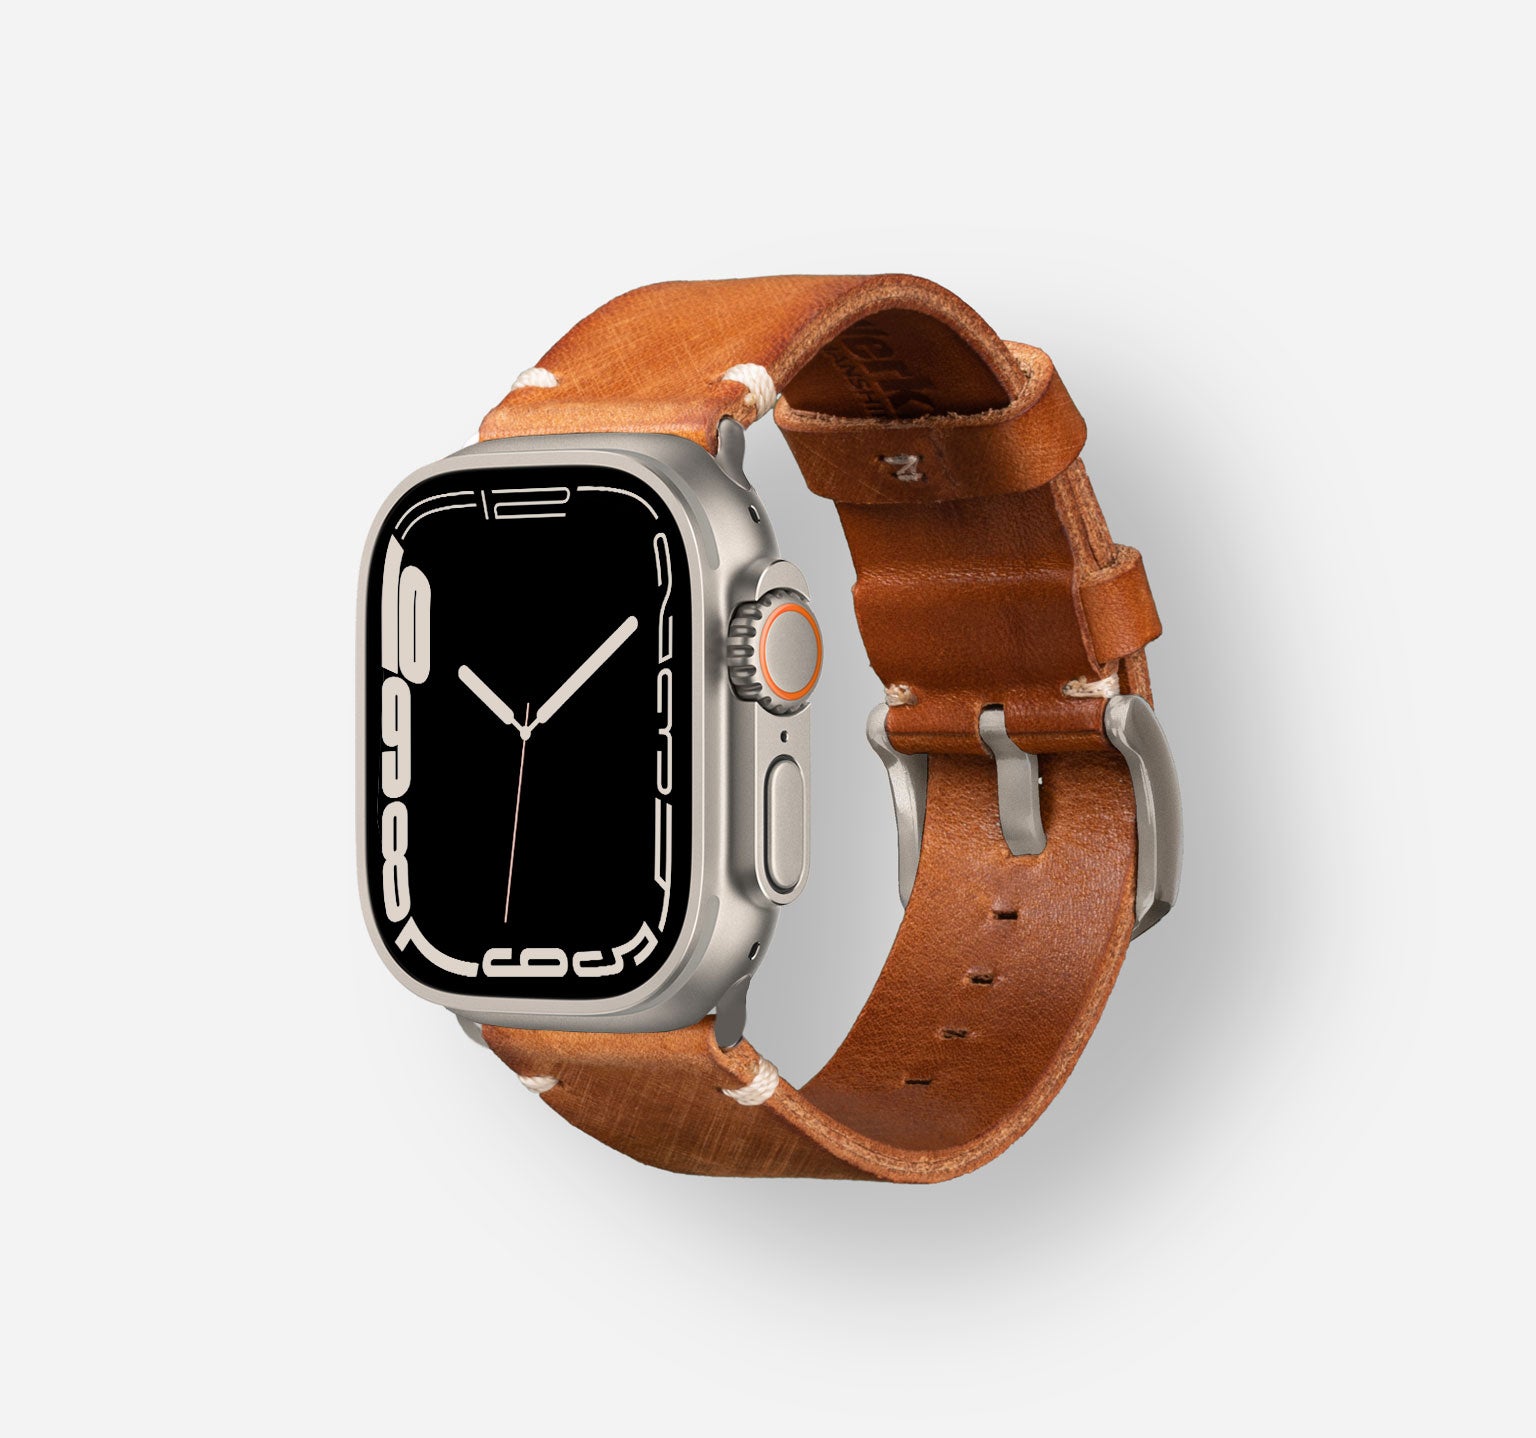 This custom made Louis Vuitton Apple Watch band looks real nice!  #applewatch